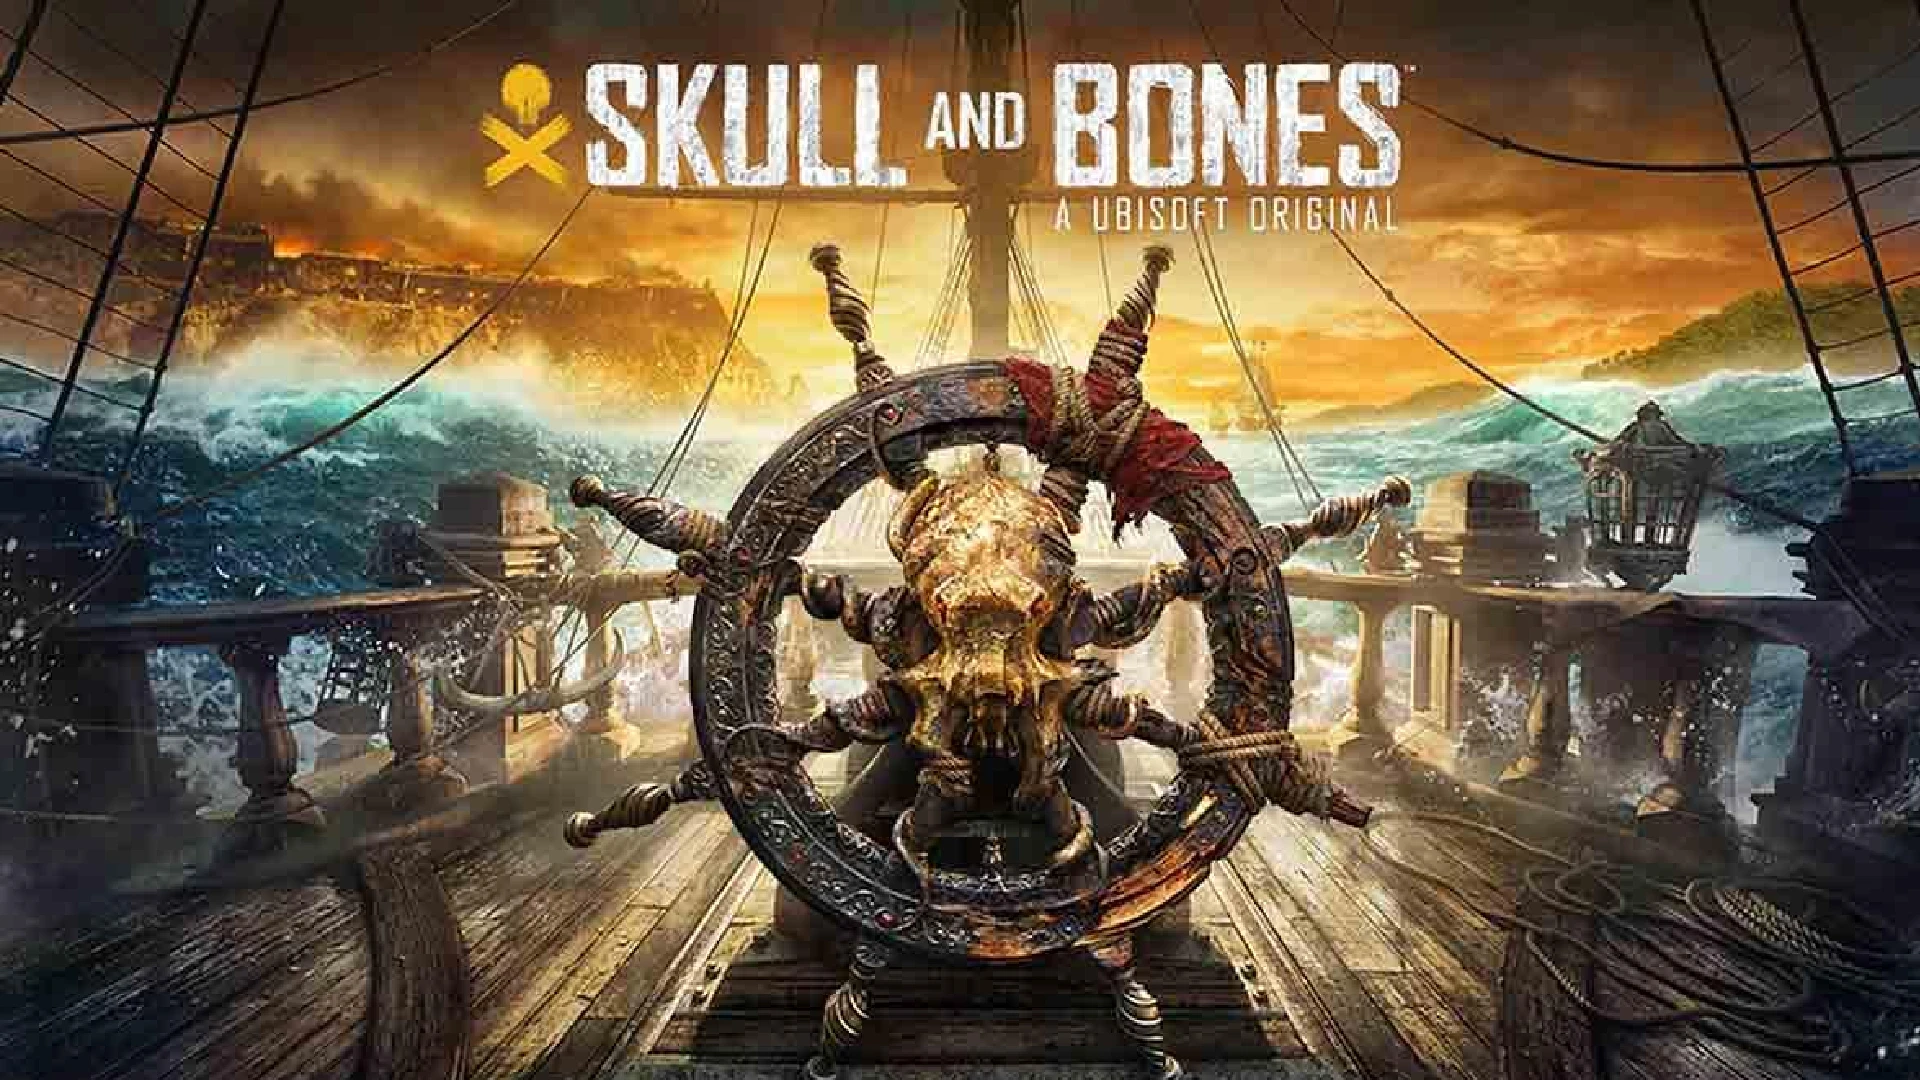 Skull and Bones is officially releasing in November, will offer a different experience